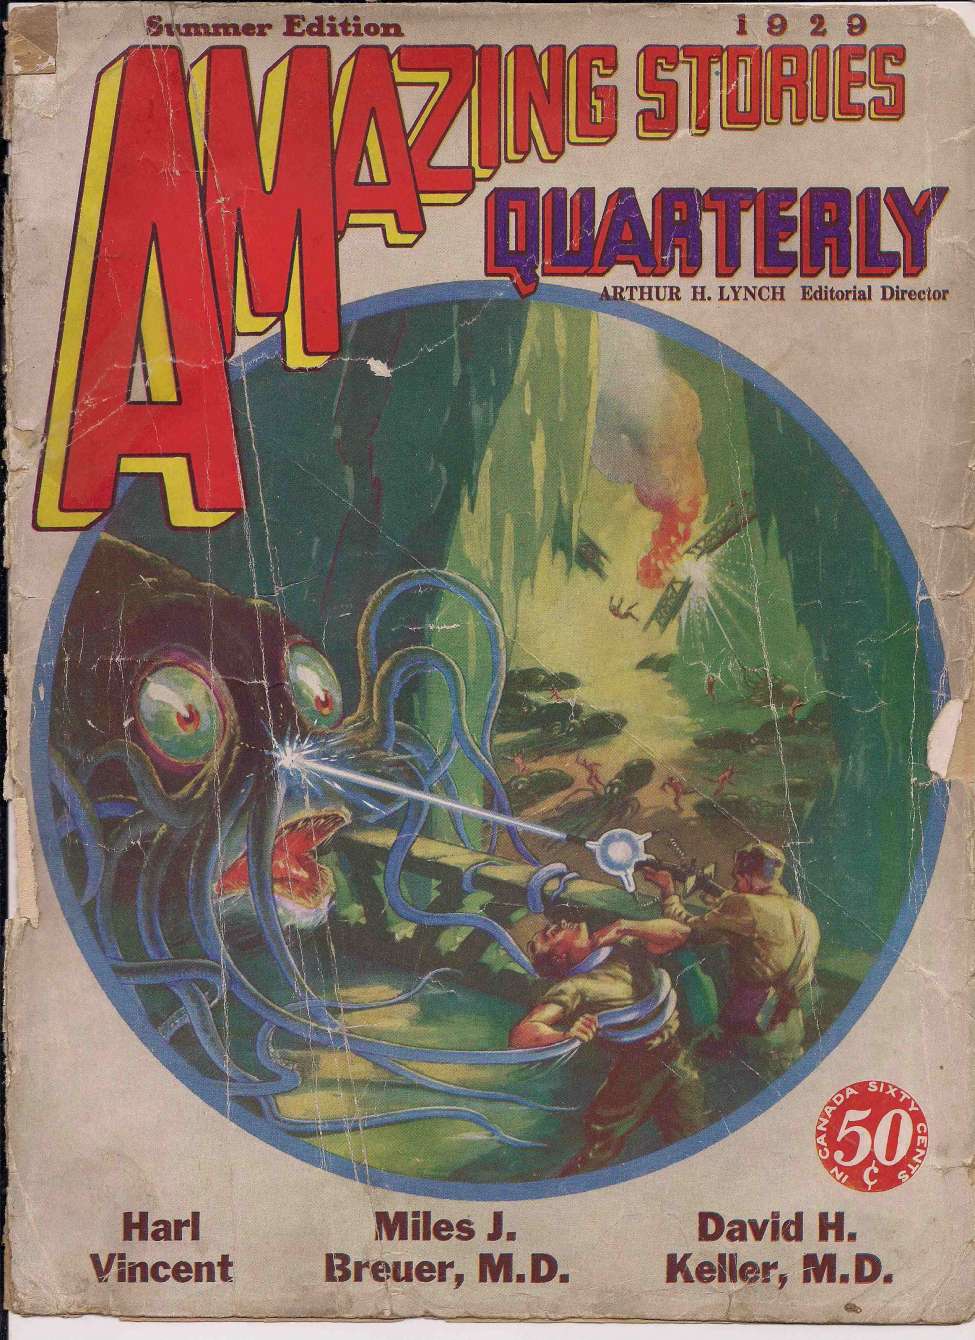 Comic Book Cover For Amazing Stories Quarterly v2 3 - Venus Liberated - Harl Vincent